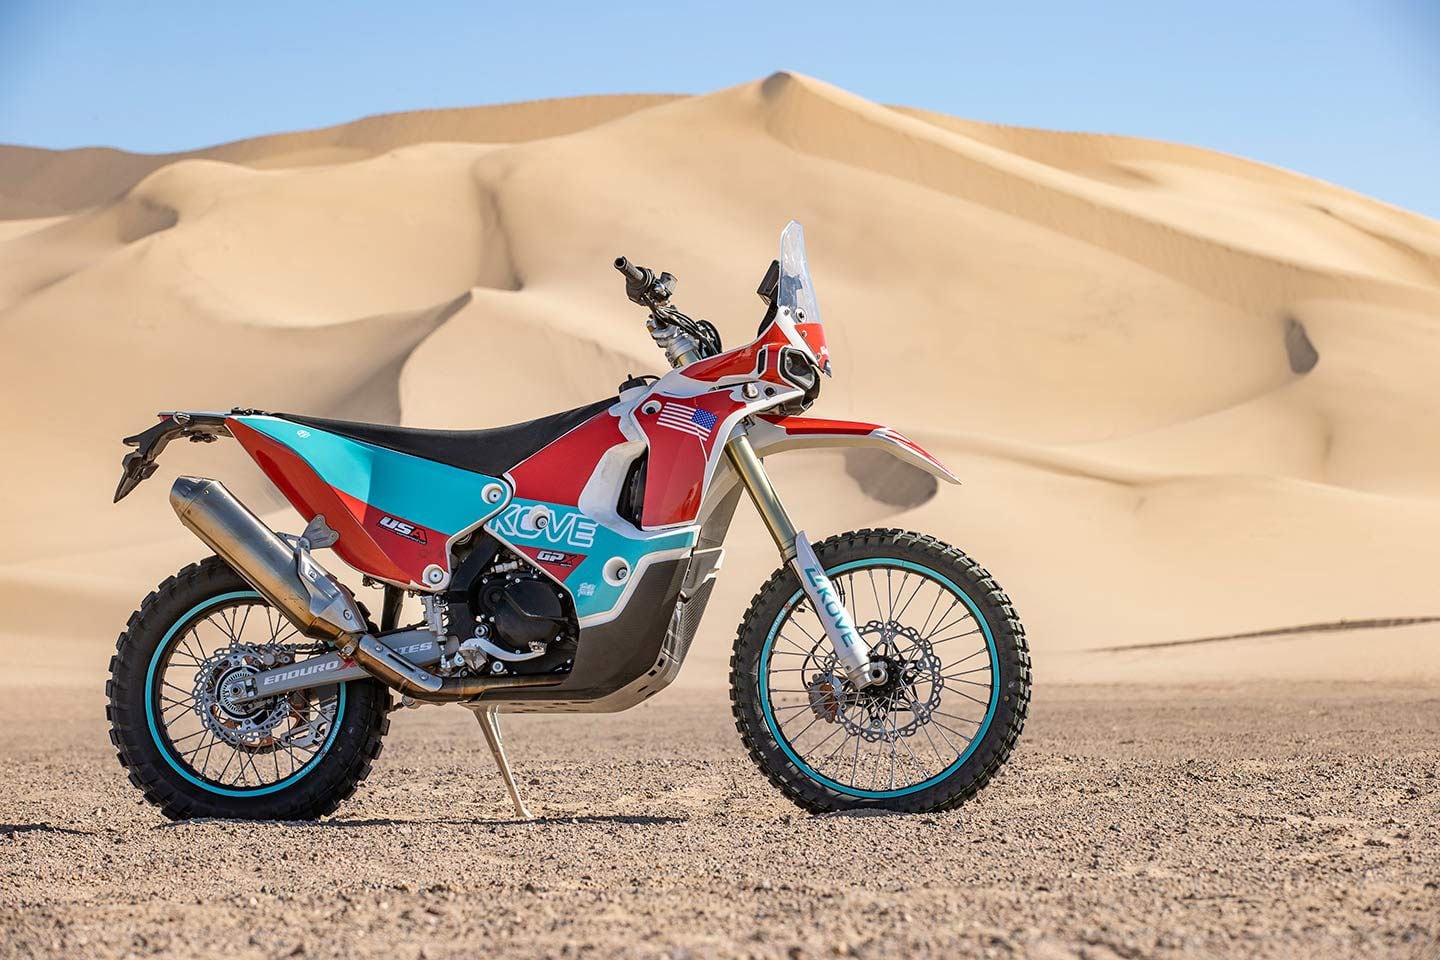 China’s Kove Moto and Utah’s GPX Moto team up to offer this $8,999 450cc rally bike for US consumption.